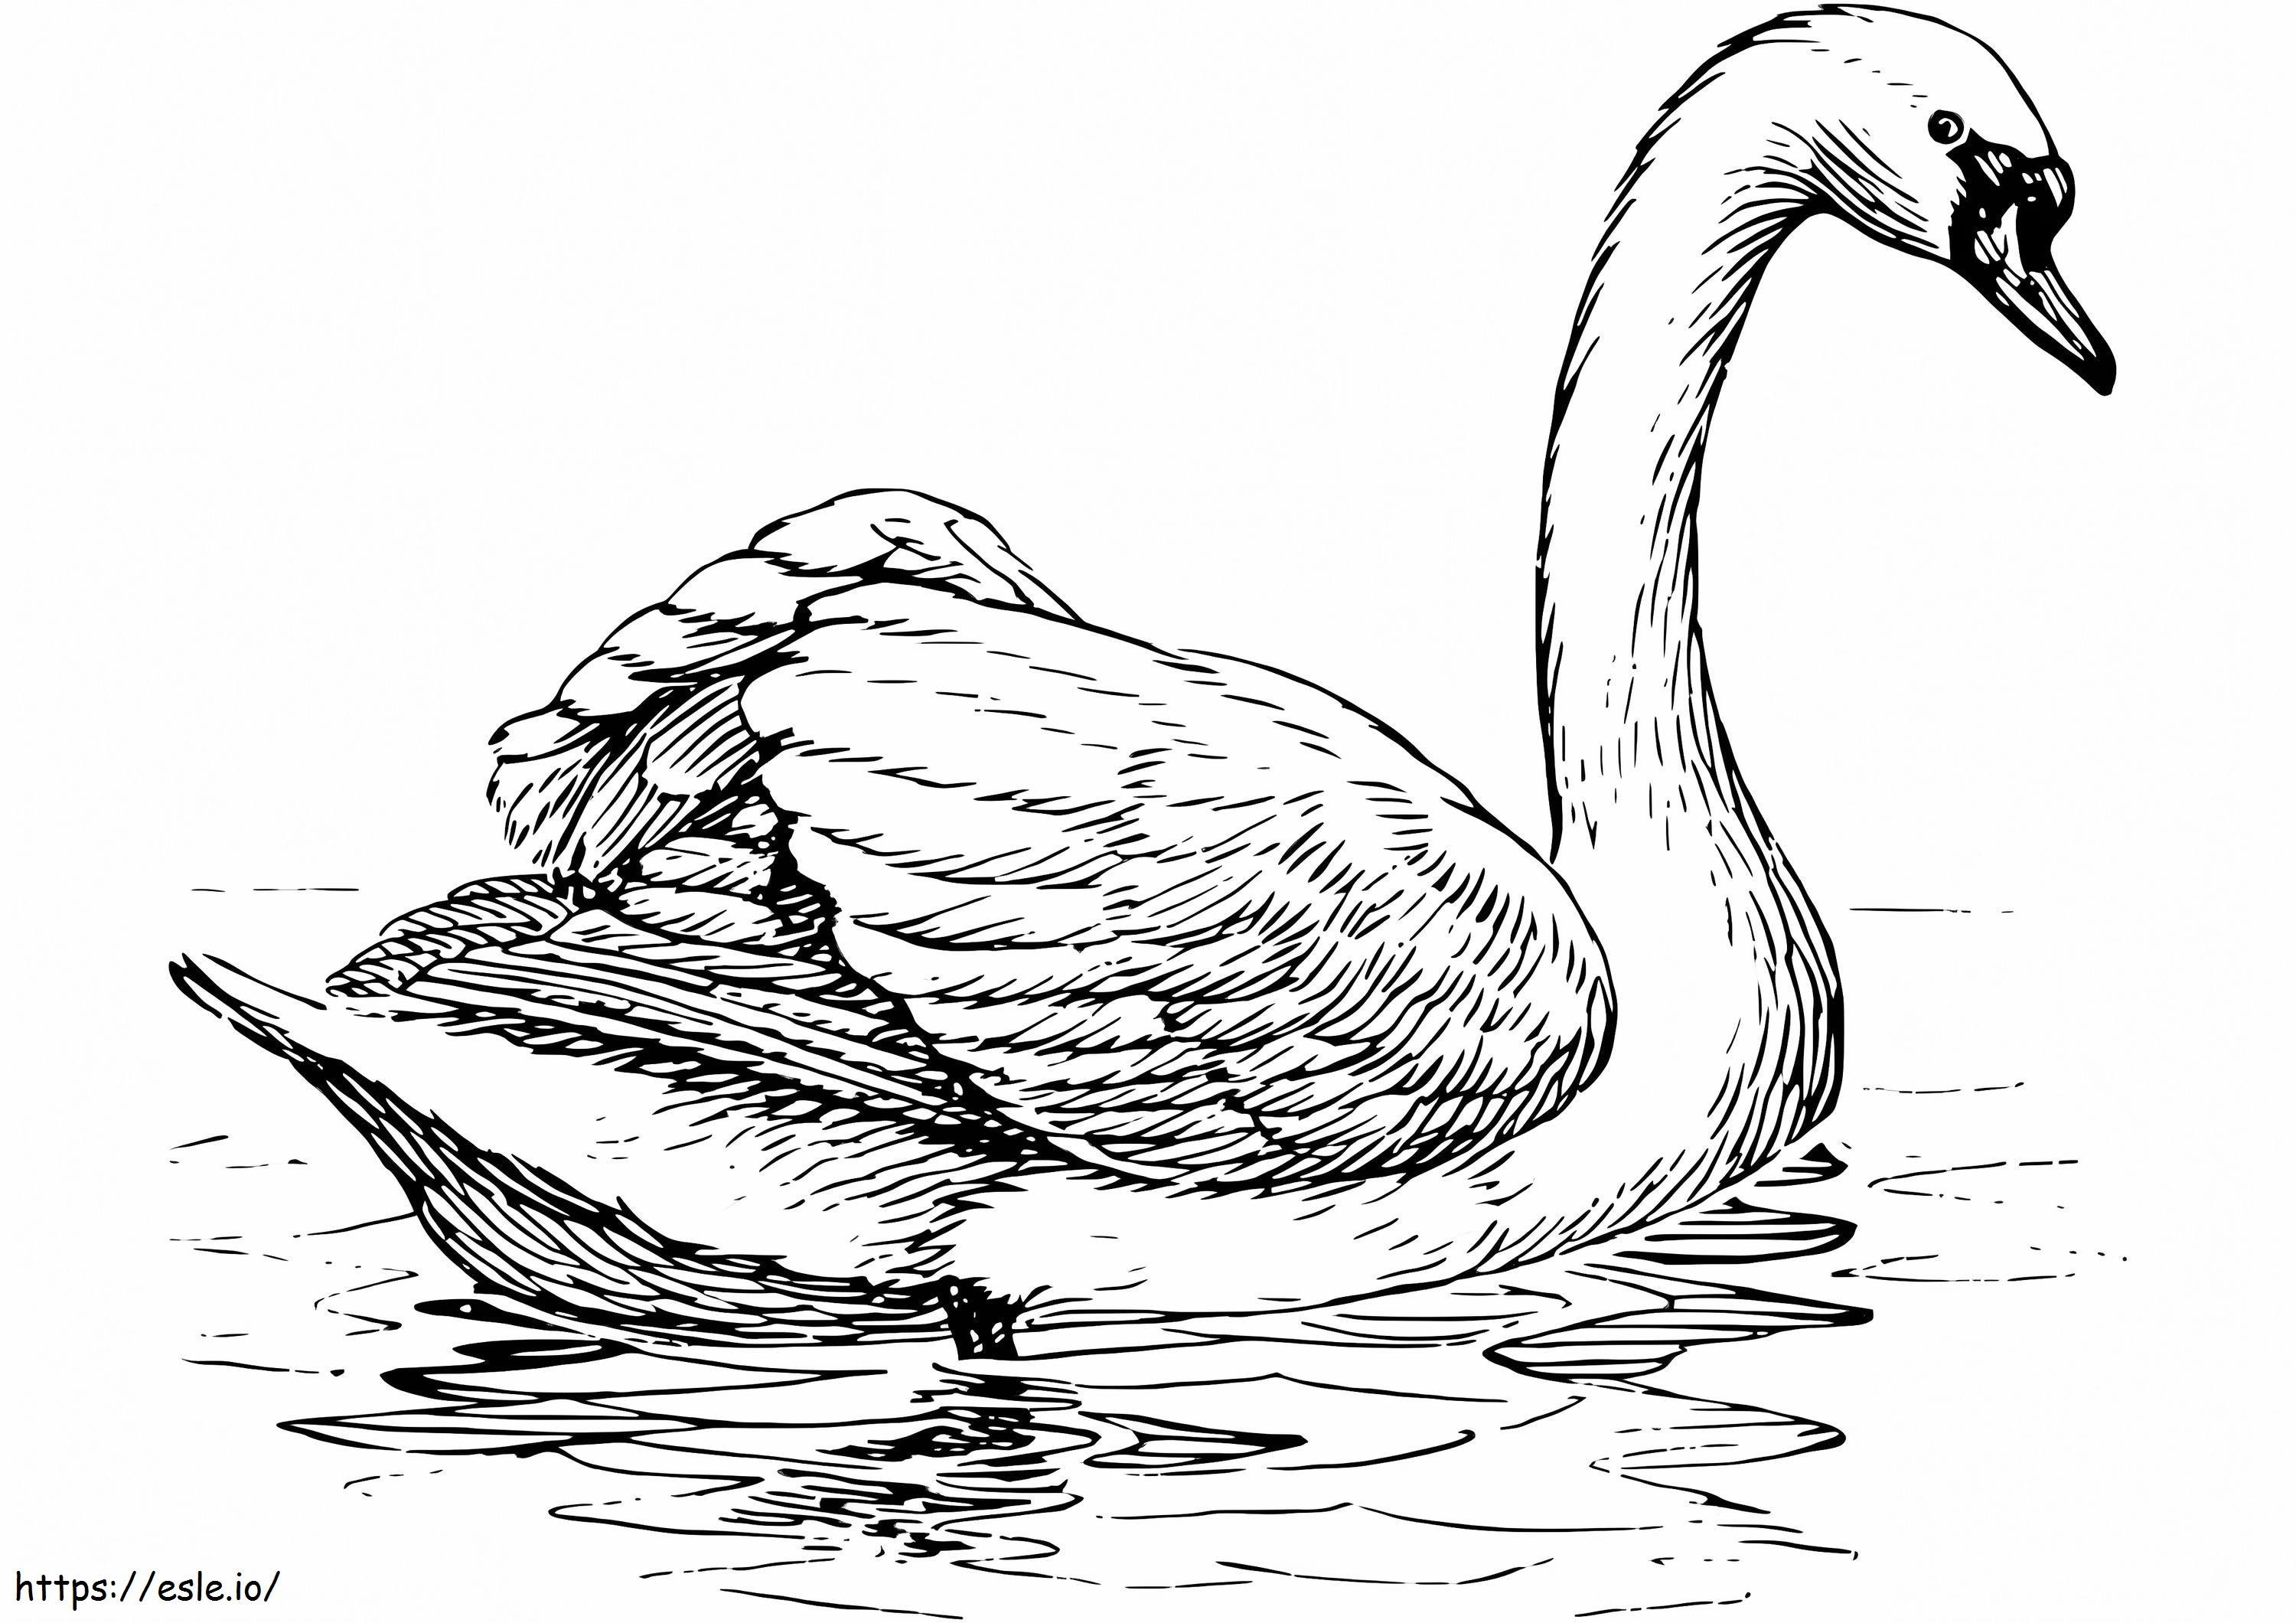 Floating Swan coloring page